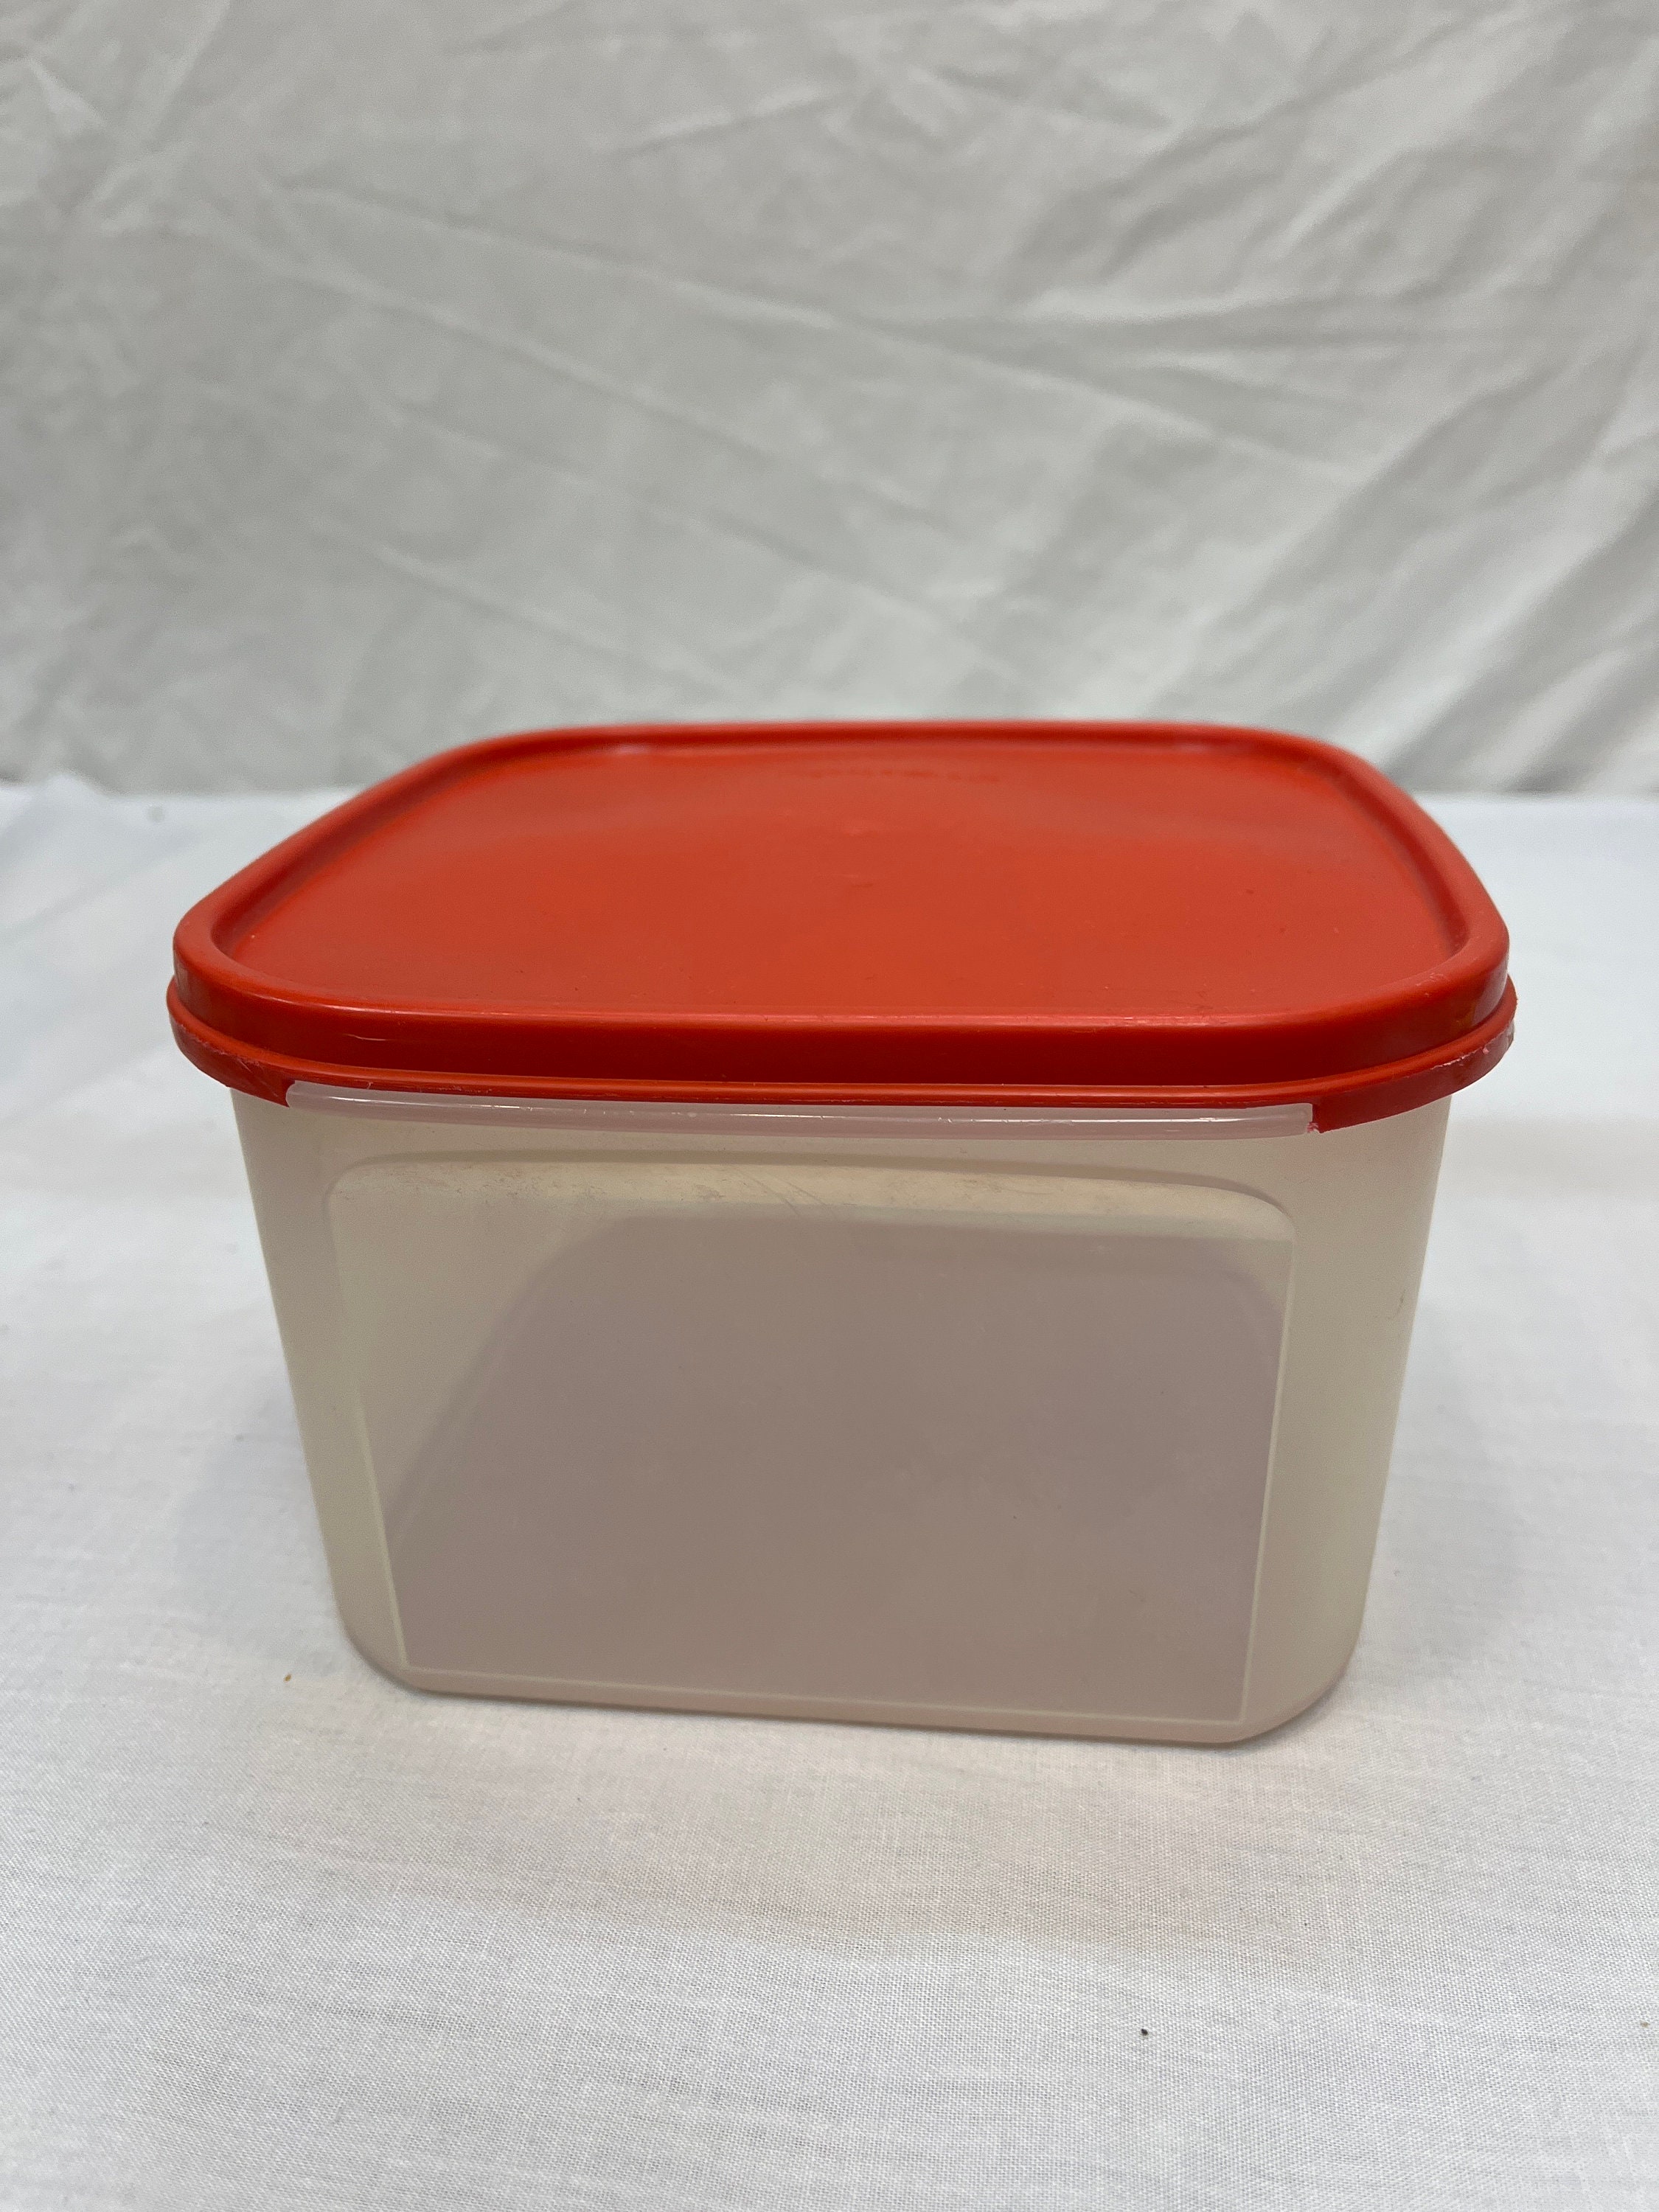 Tupperware 499-3 Narrow Small Cereal Containter, Lid 509-11 